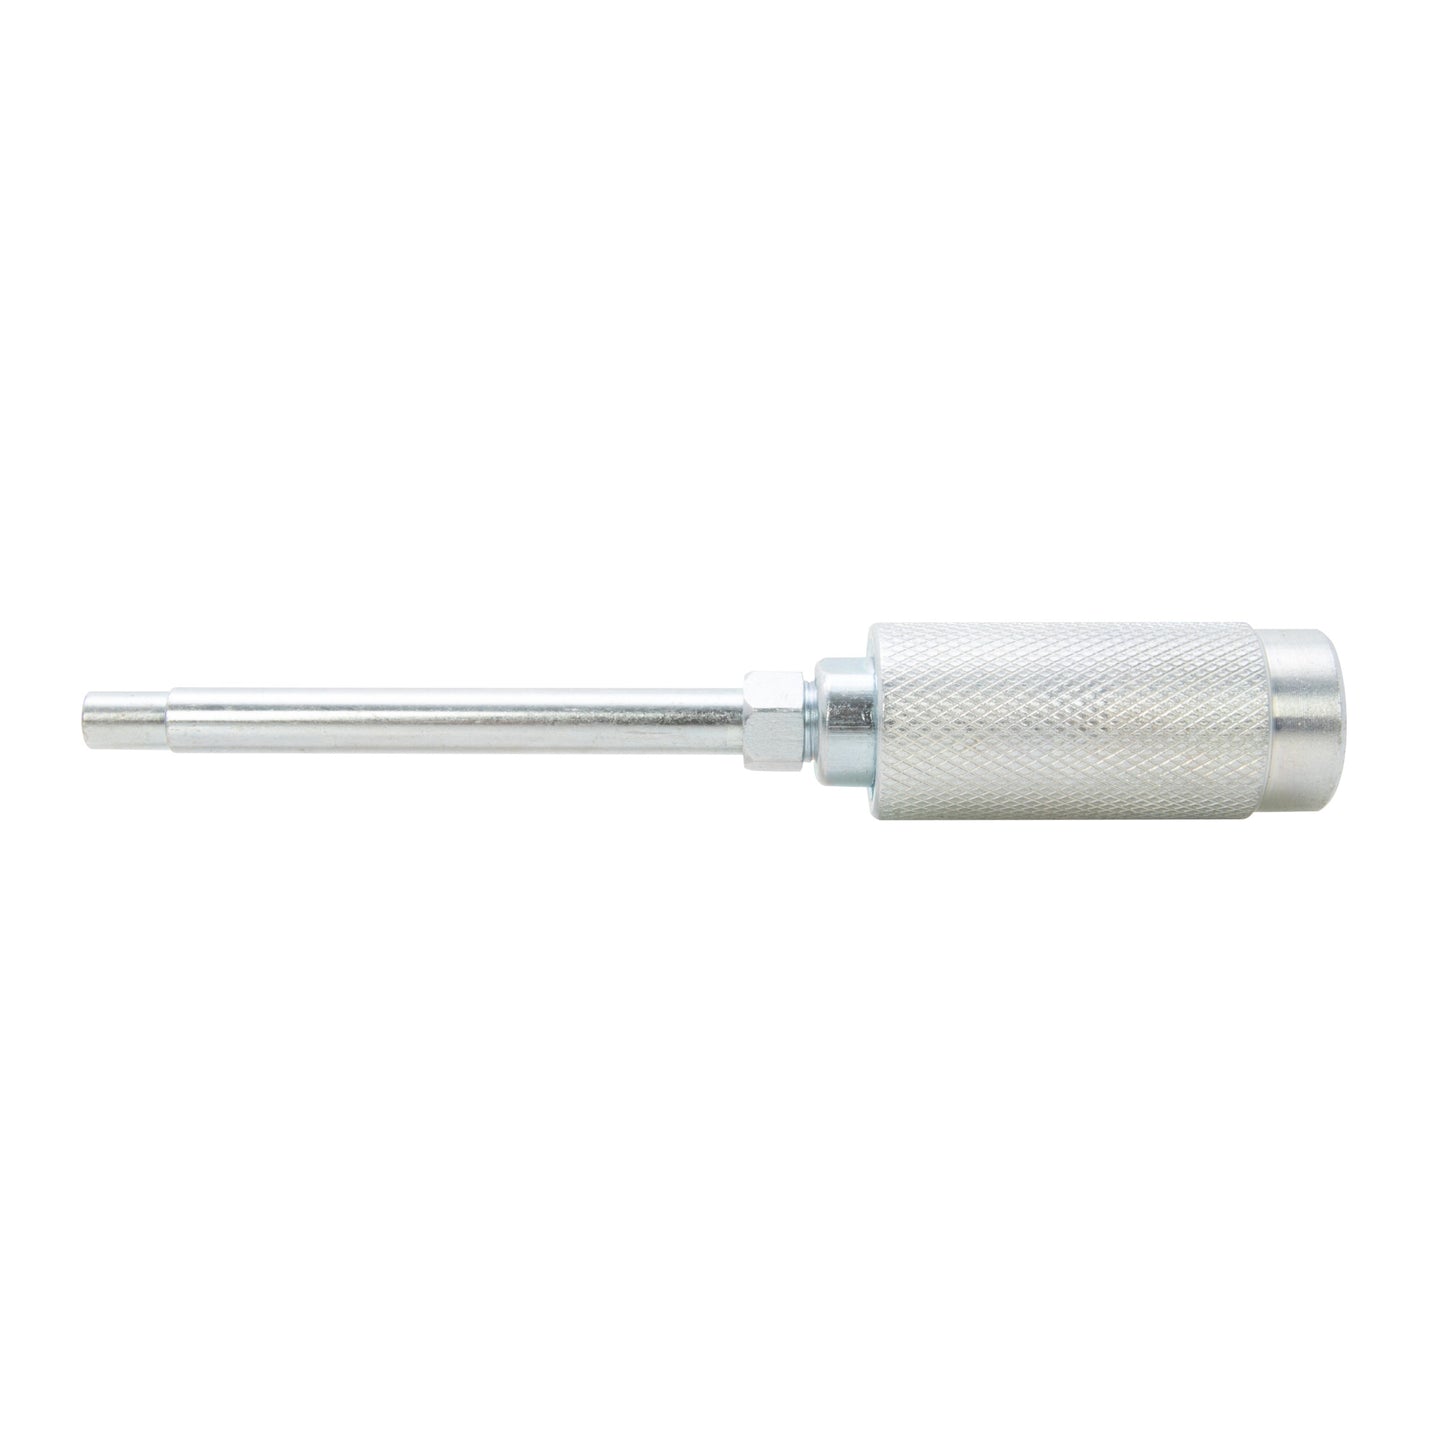 5-inch Straight Extension Push-On Grease Gun Adapter